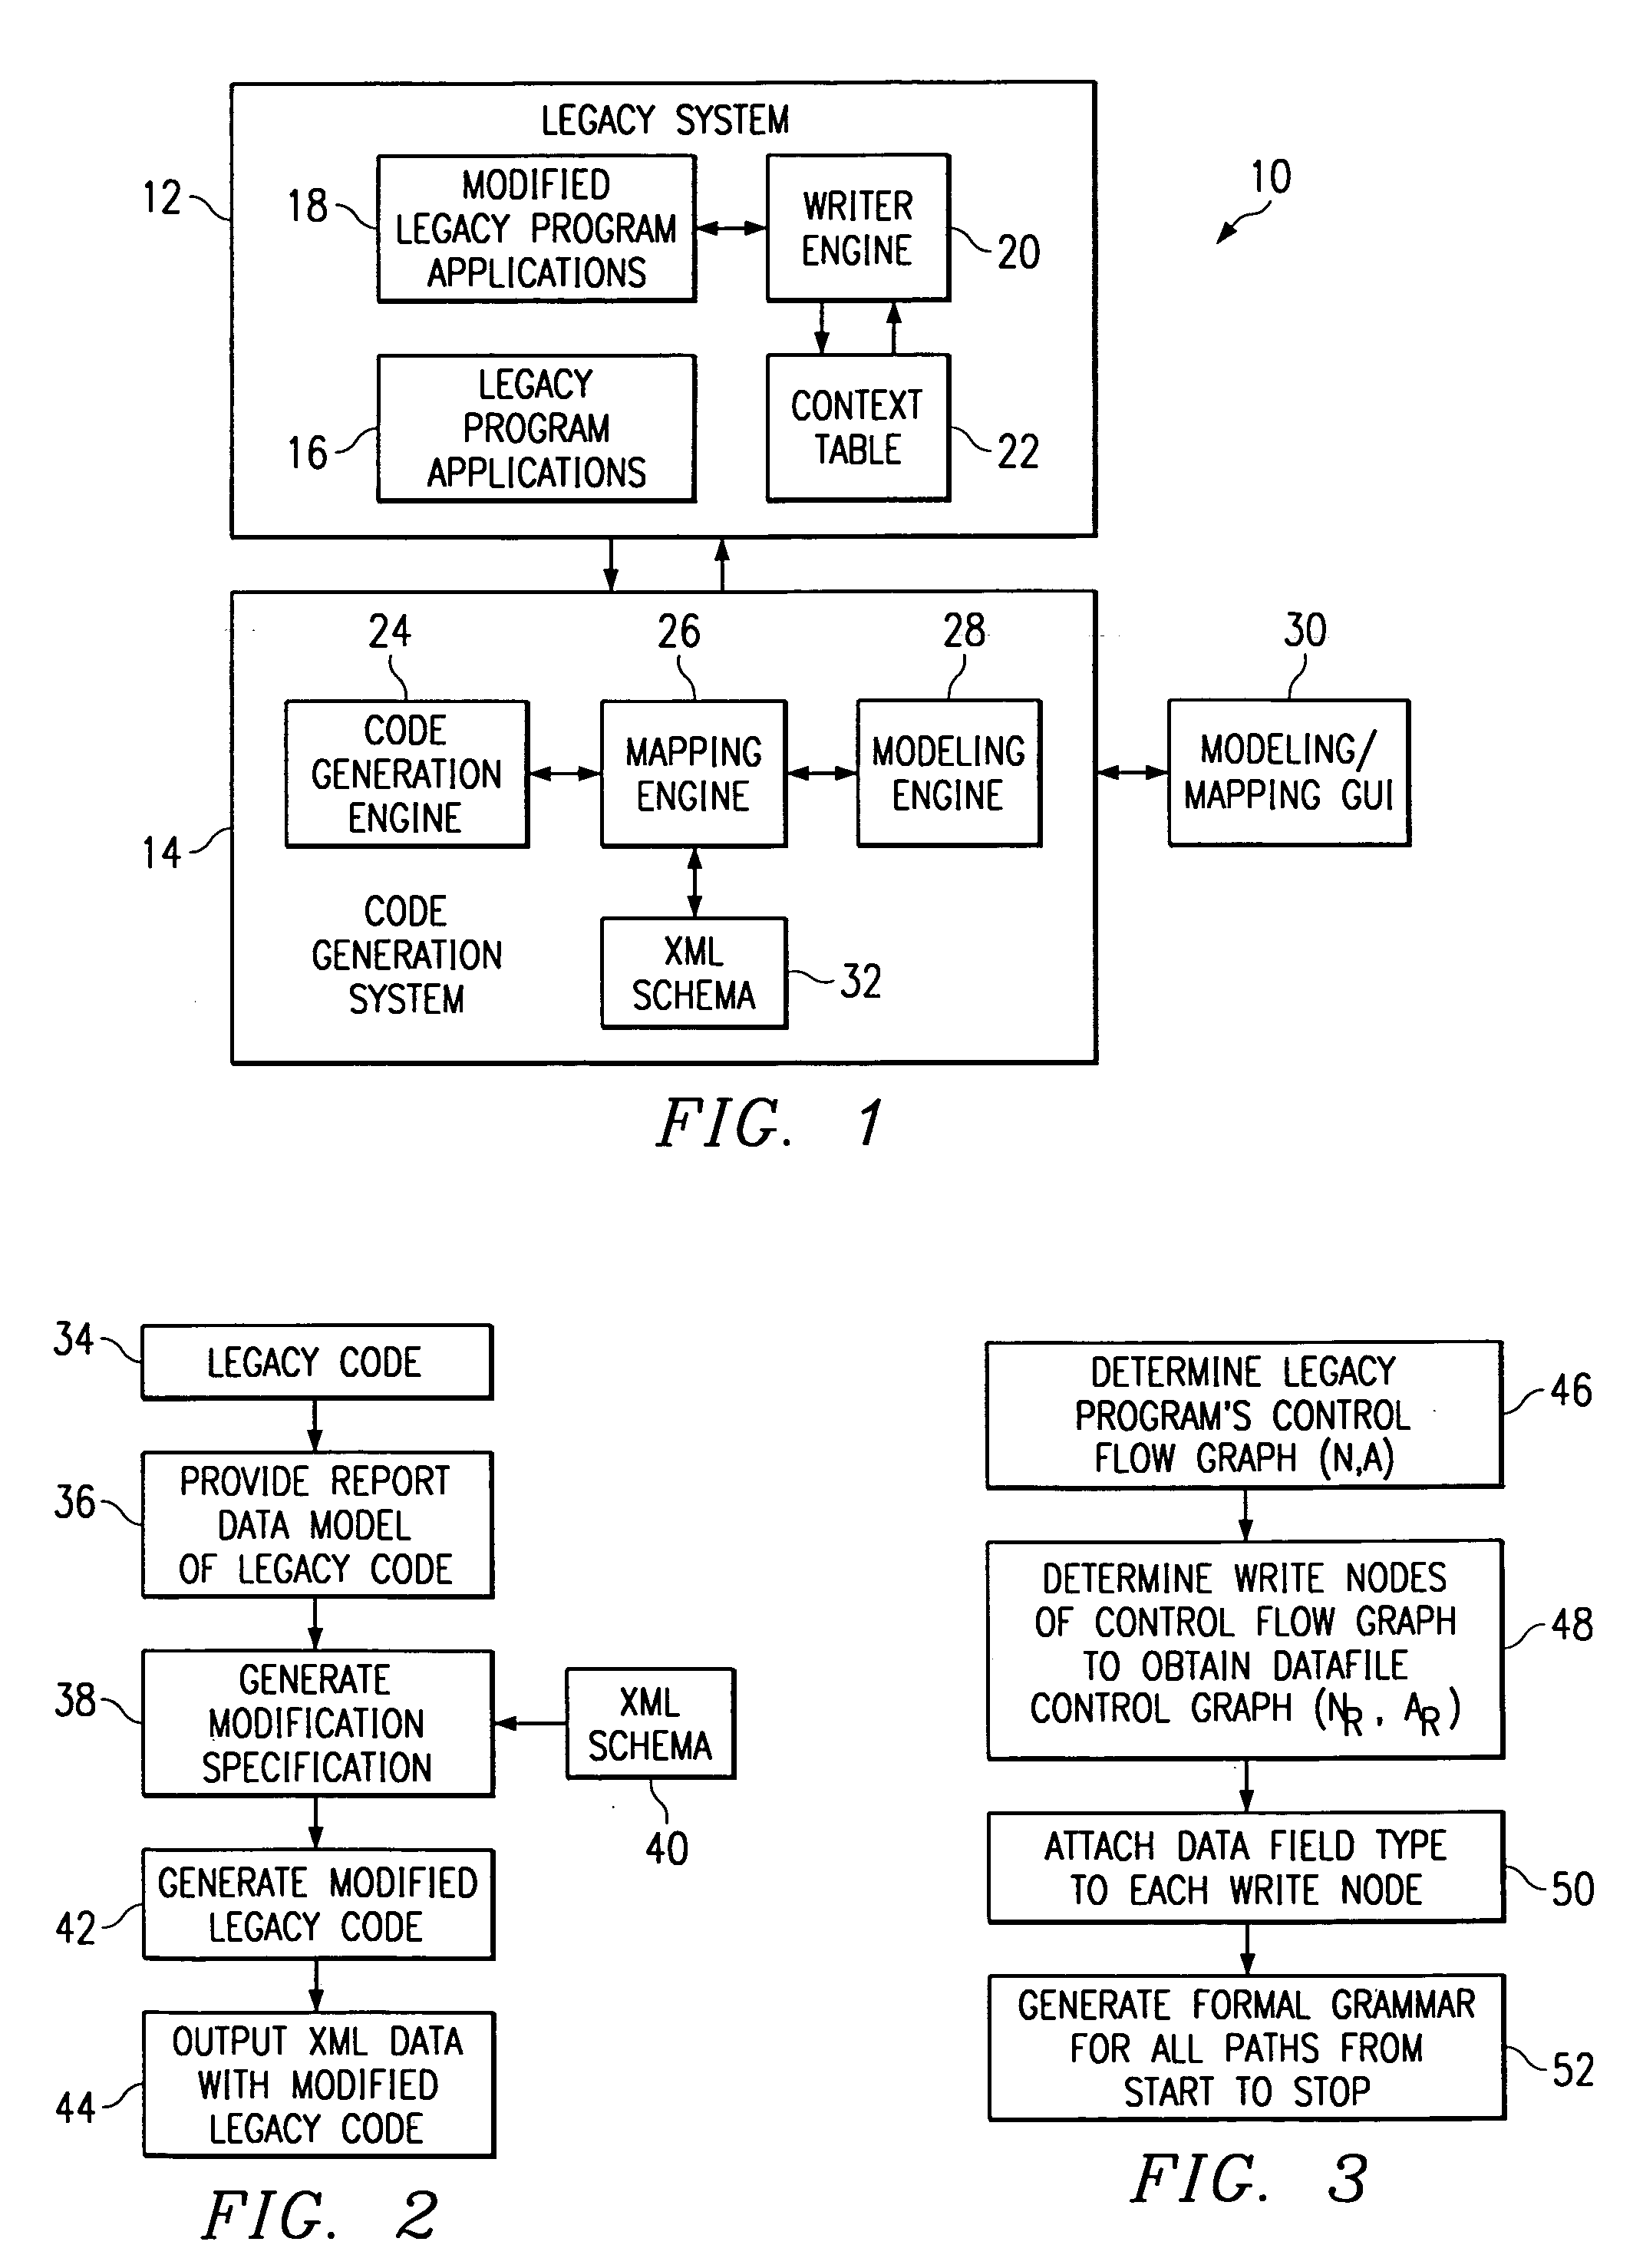 Method and system for modeling a legacy computer system